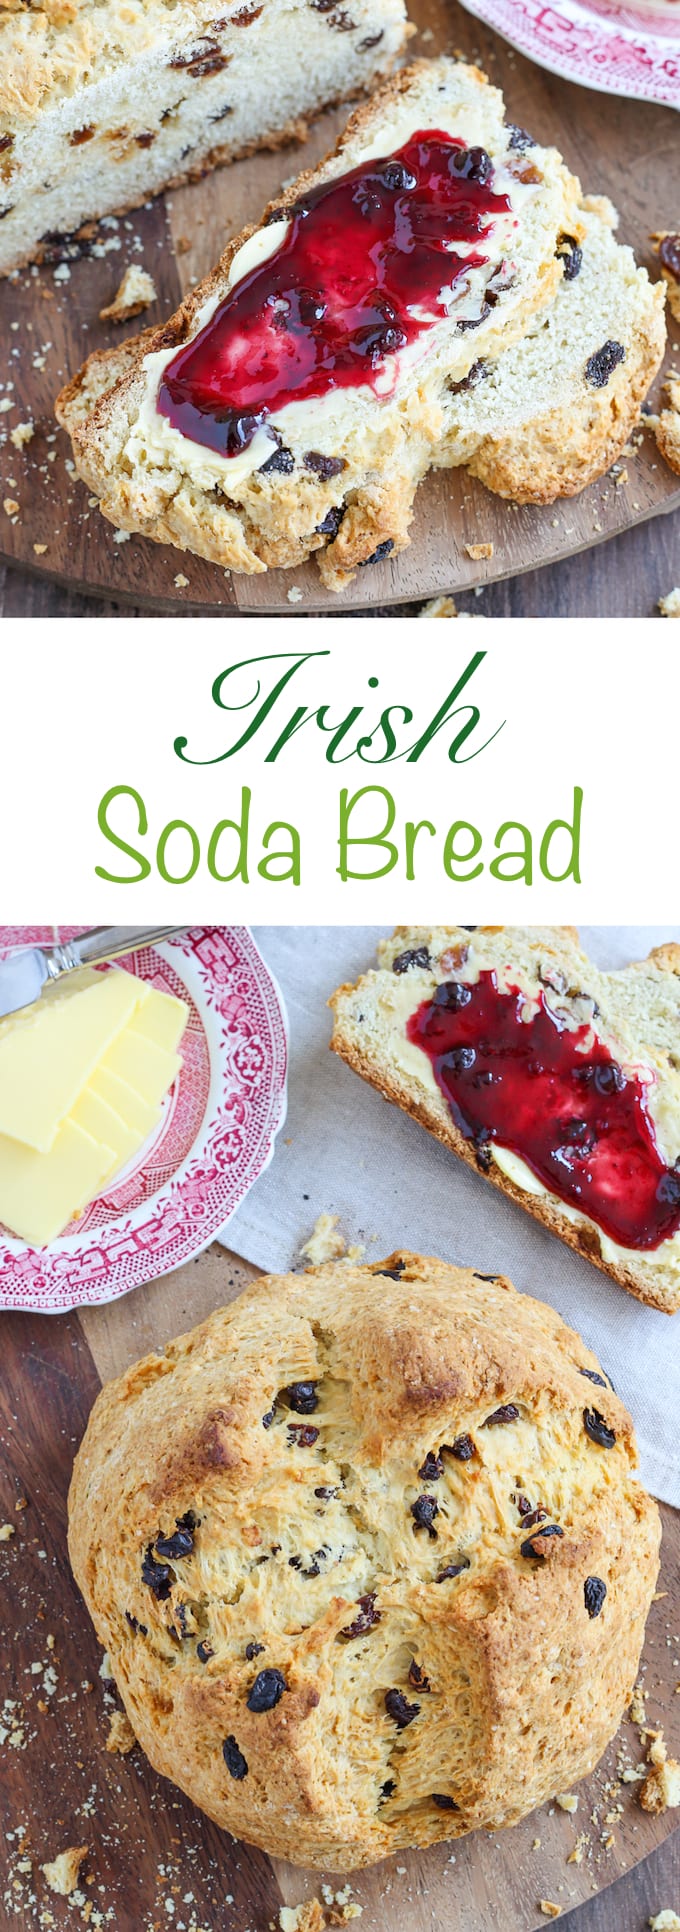 This Irish Soda Bread is tender and just a little sweet. Nothing is better than a thick slice fresh from the oven slathered with Irish butter and fruit jam. I searched for years for the best soda bread recipe and this is it!!!